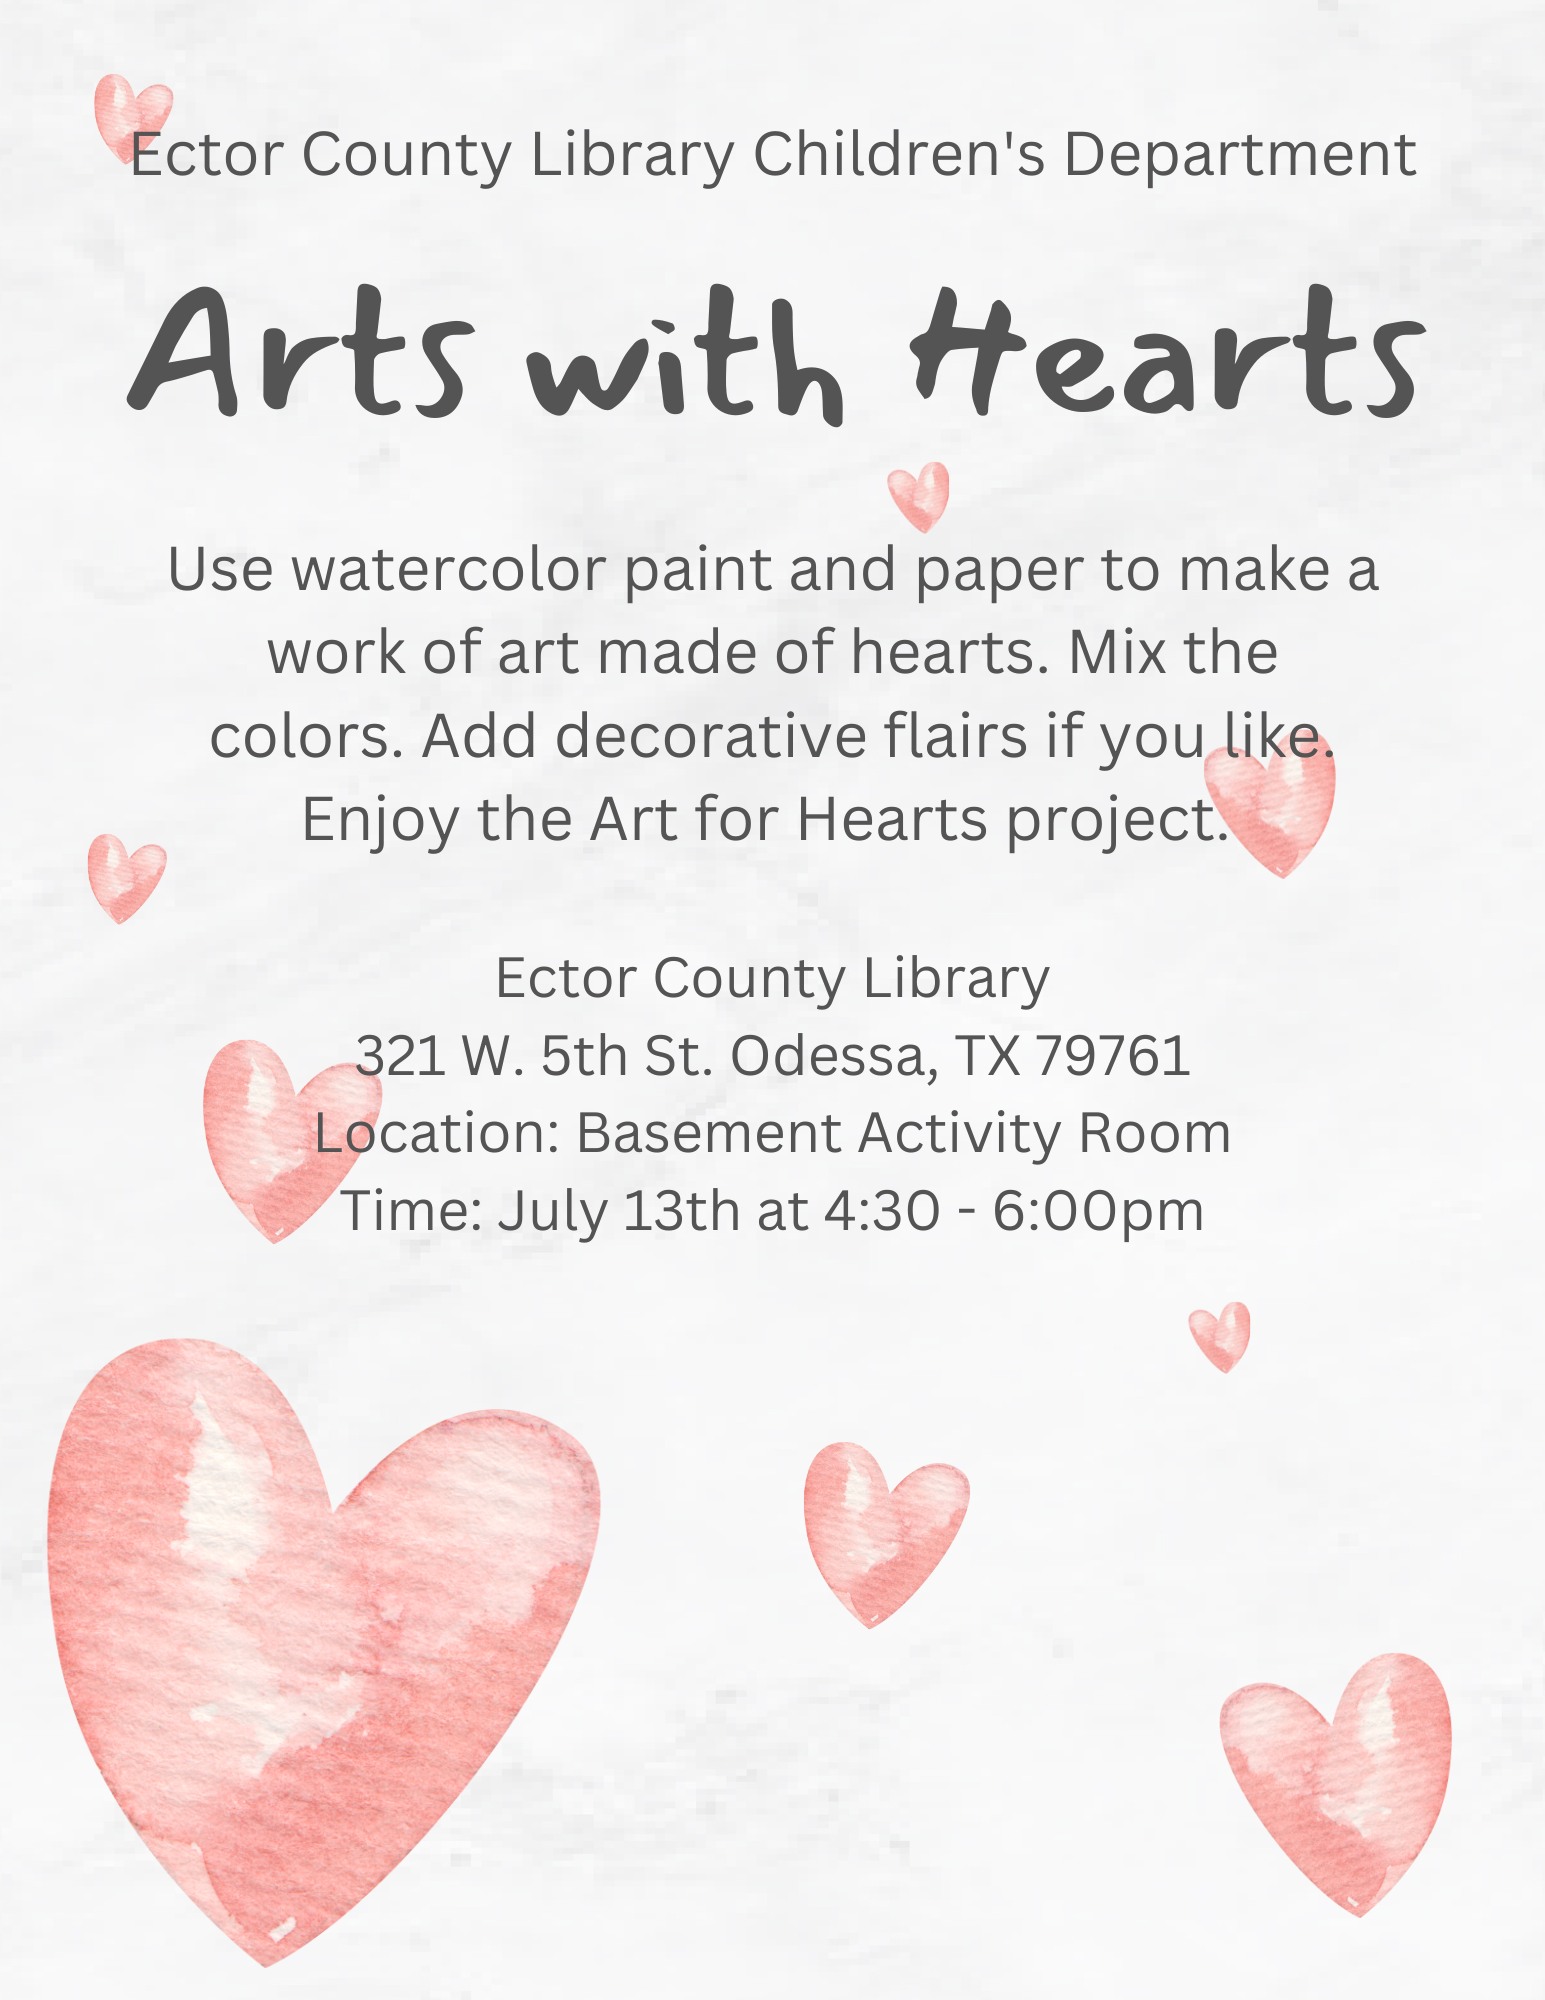 Arts with Hearts Kids Activity at the Ector County Library